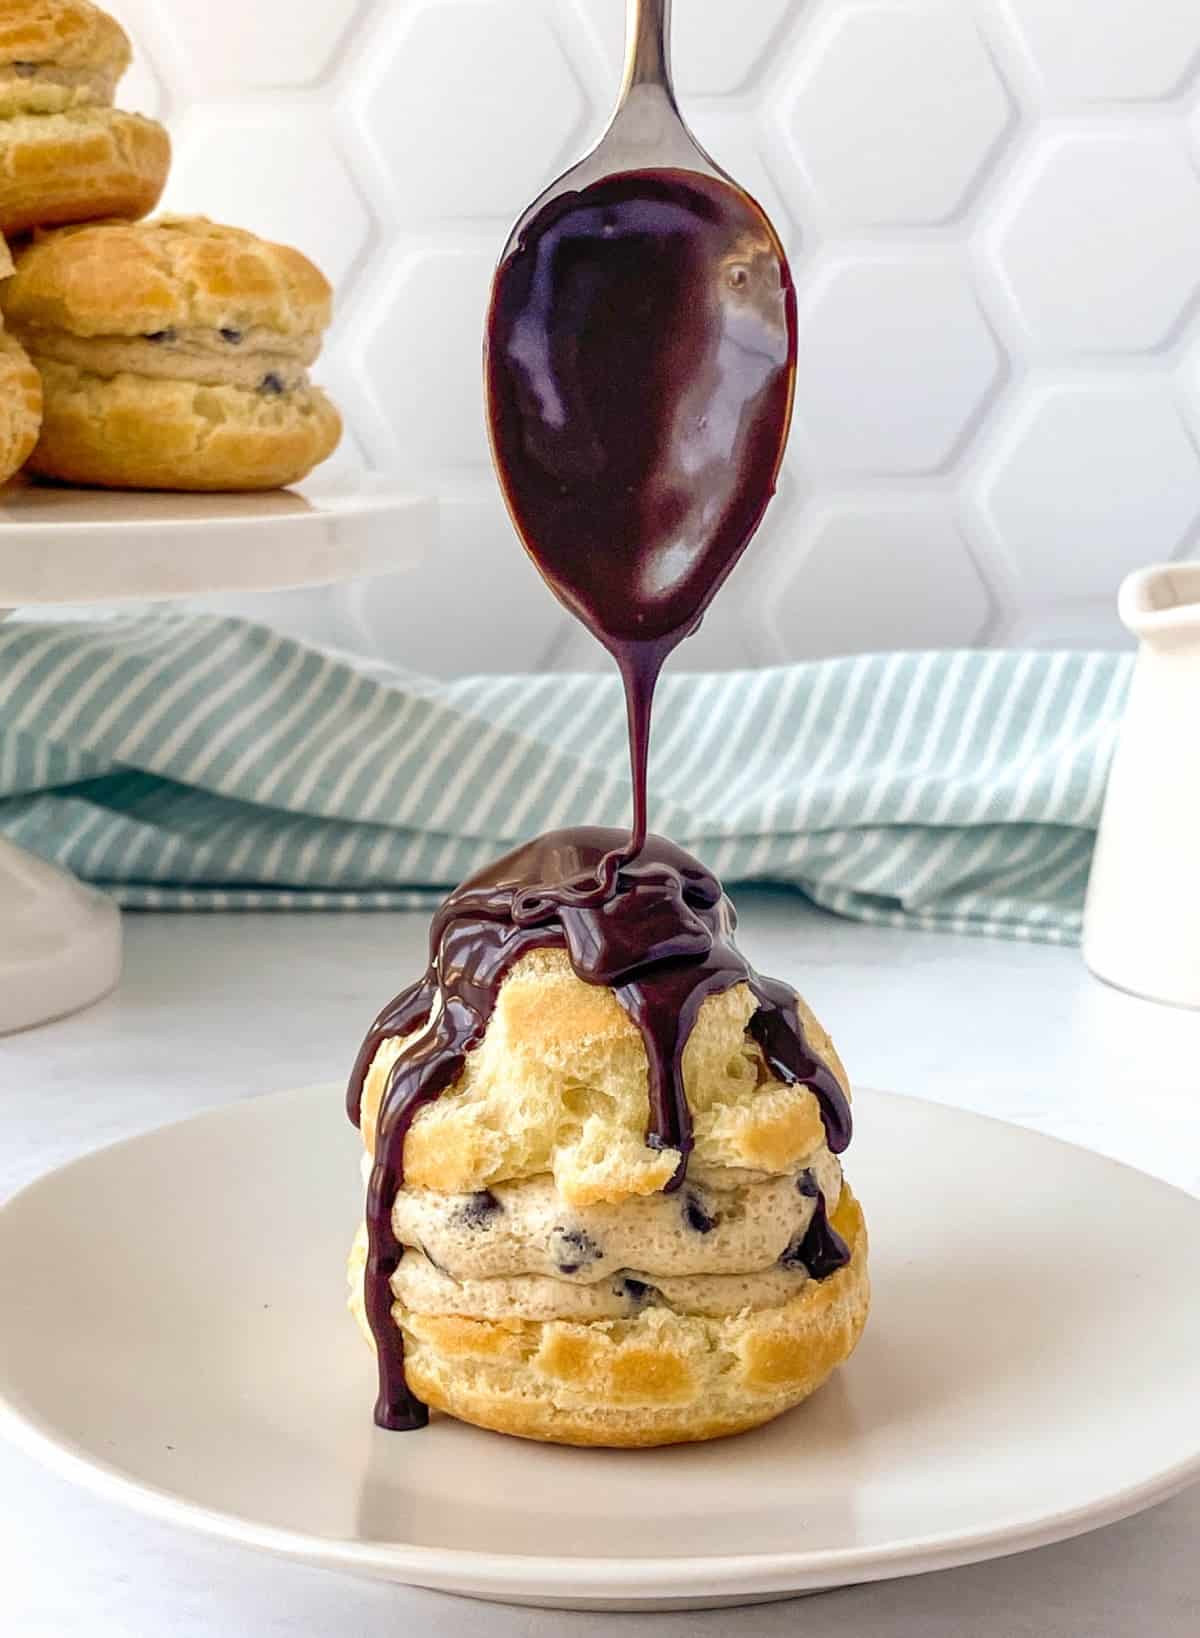 Homemade chocolate sauce being drizzled on a Cookie Dough Cream Puff.